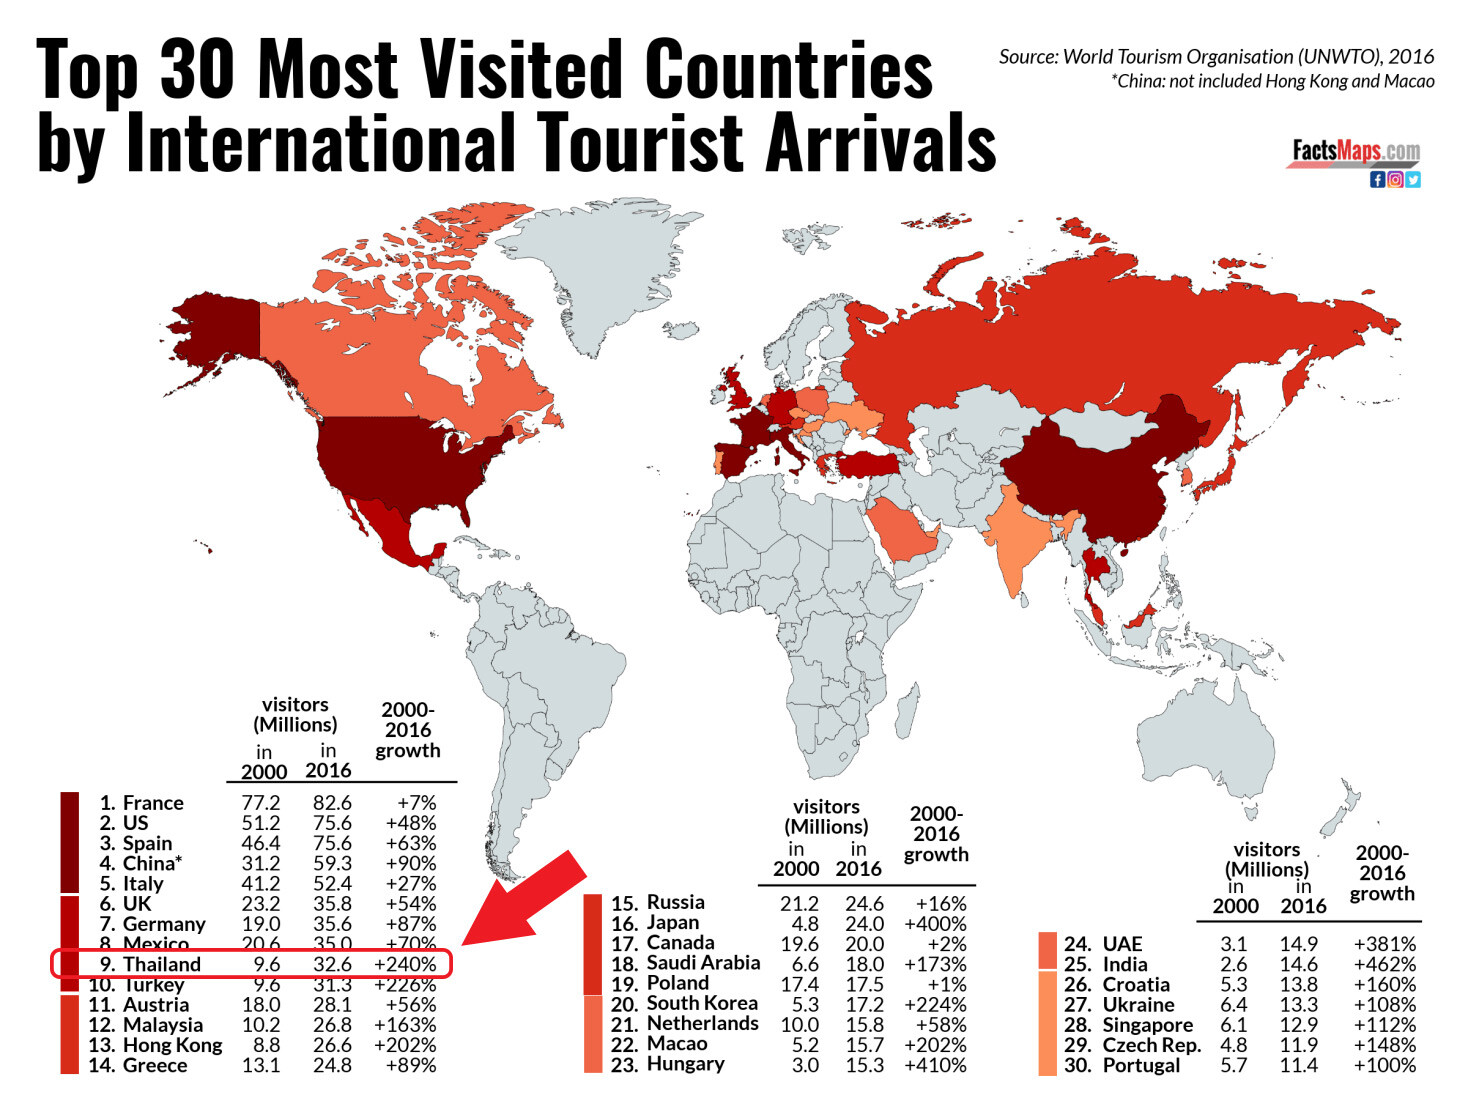 Thailand is the top 10 most visited countries in the world